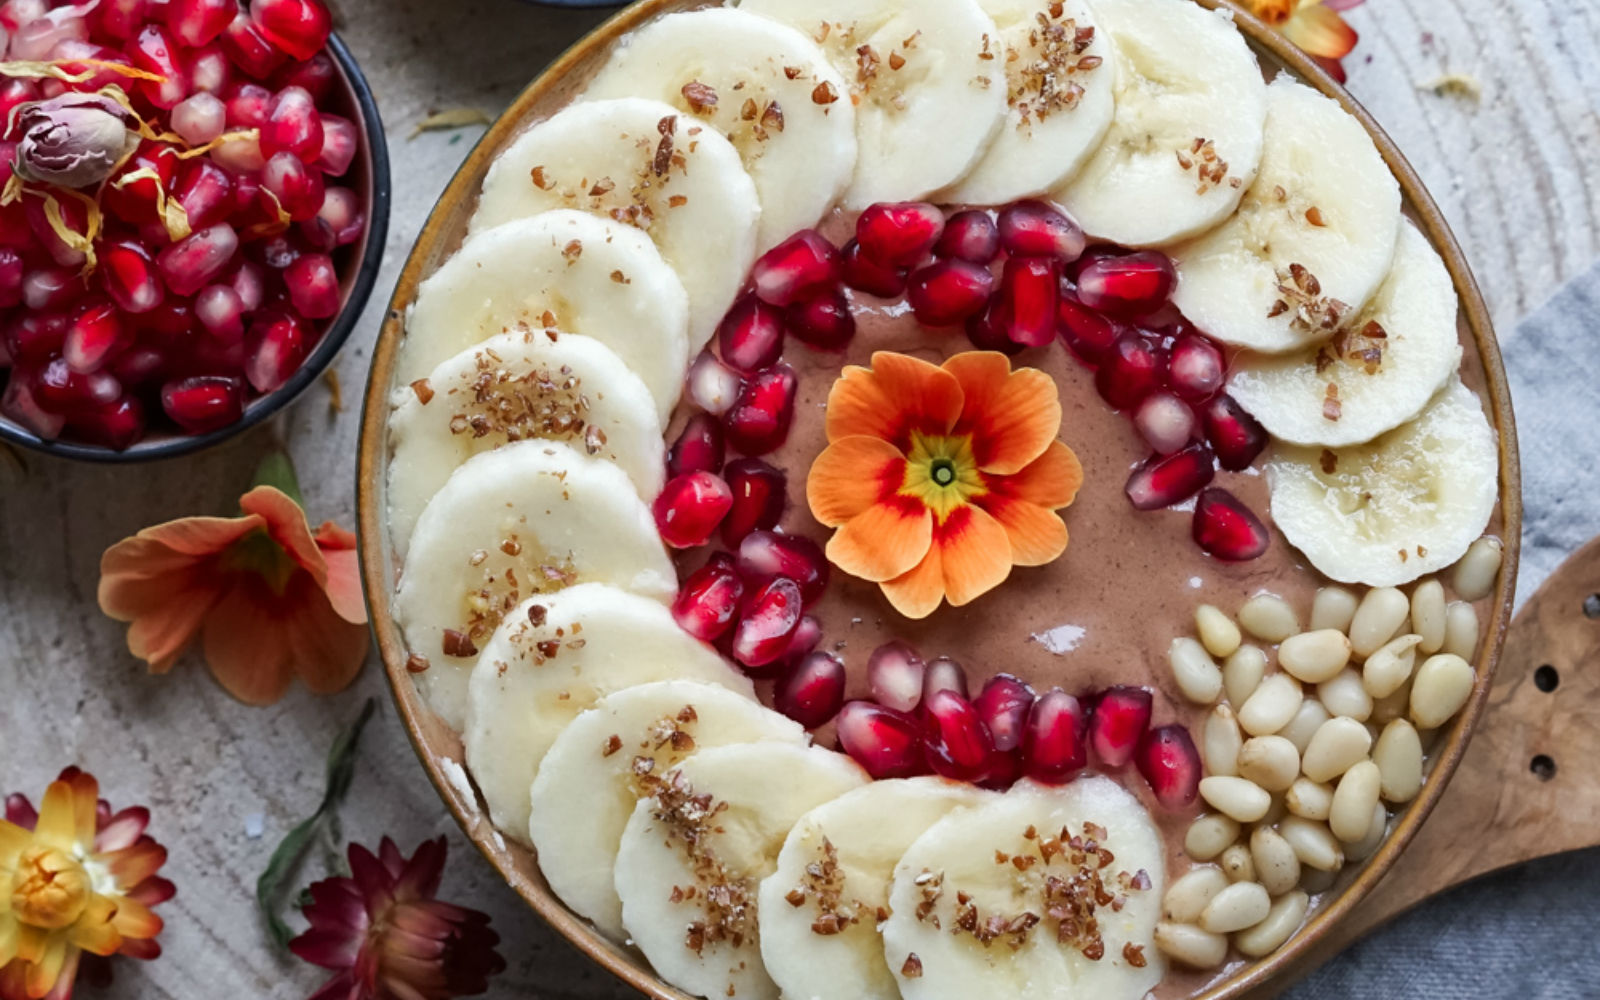 Vegan gluten-free Silken Tofu Chocolate Smoothie Bowl topped with fruit and a flower